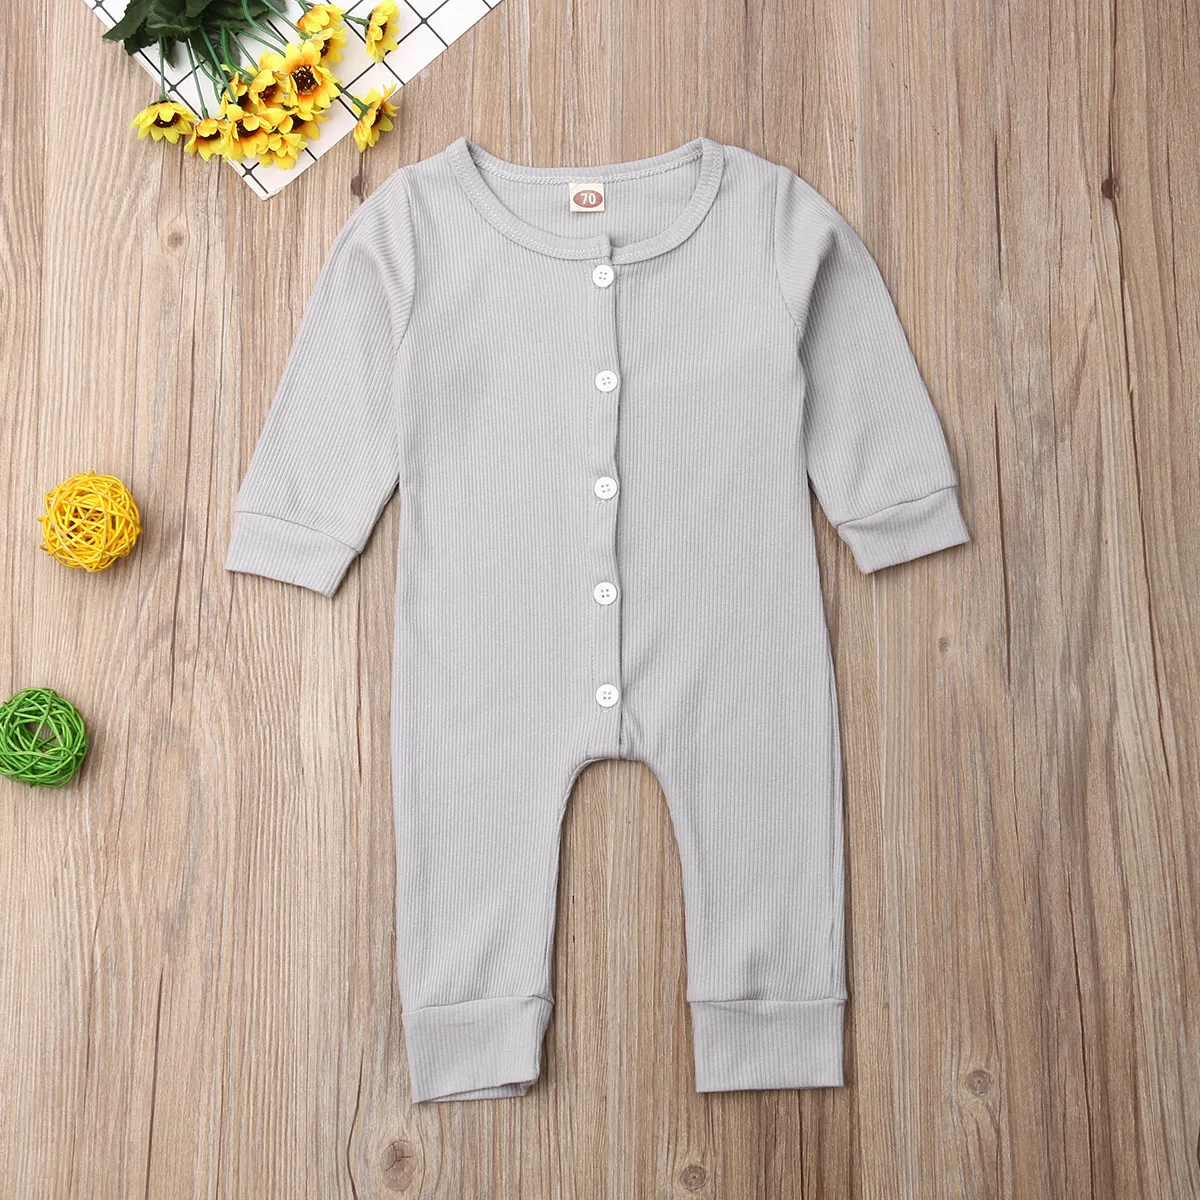 Ma&Baby 0-24M Newborn Infant Baby Boy Girl Jumpsuit Soft Knitted Long Sleeve Button Romper Autumn Spring Baby Clothing